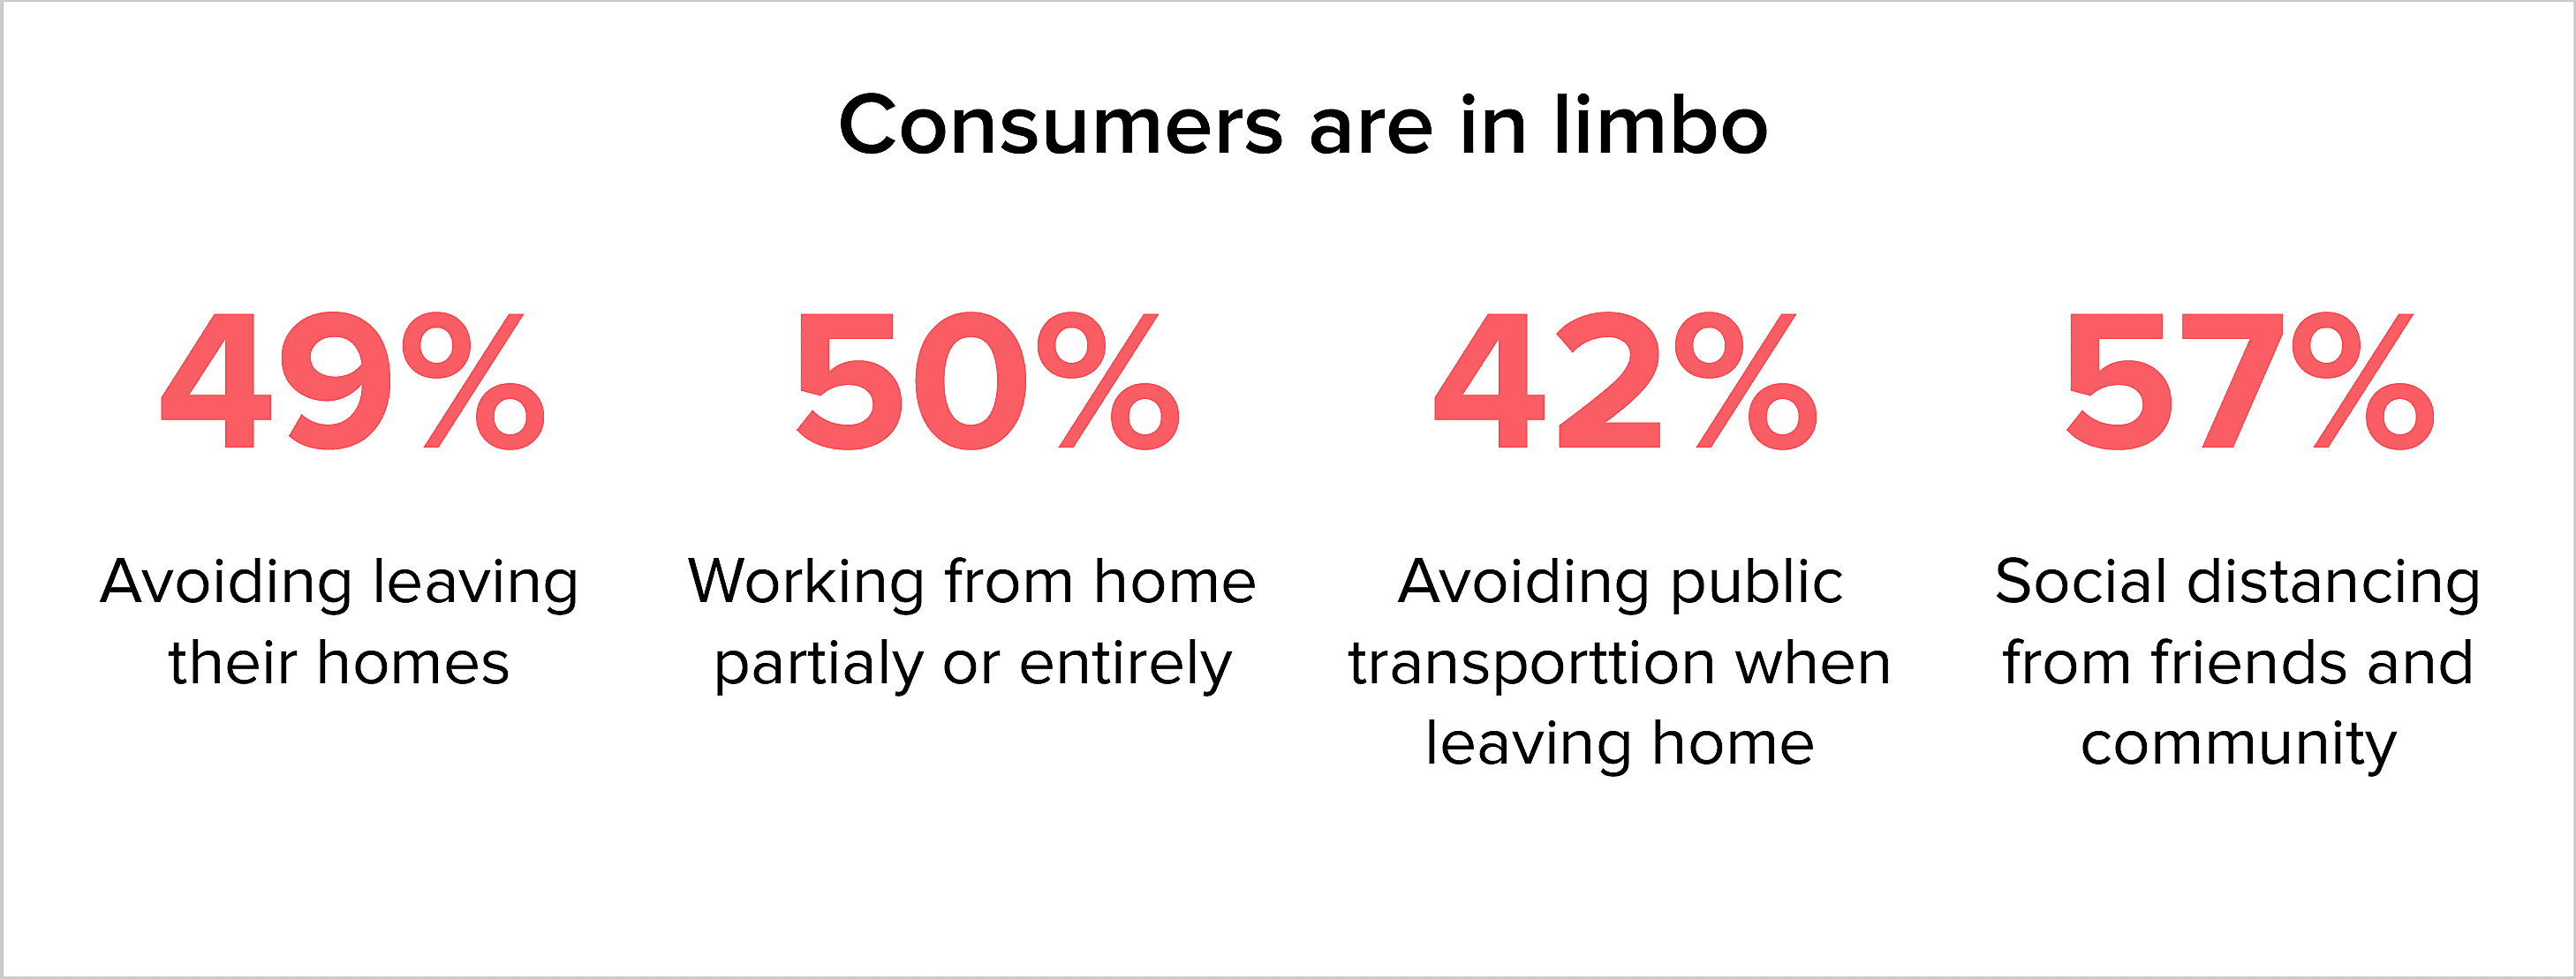 consumers are in limbo